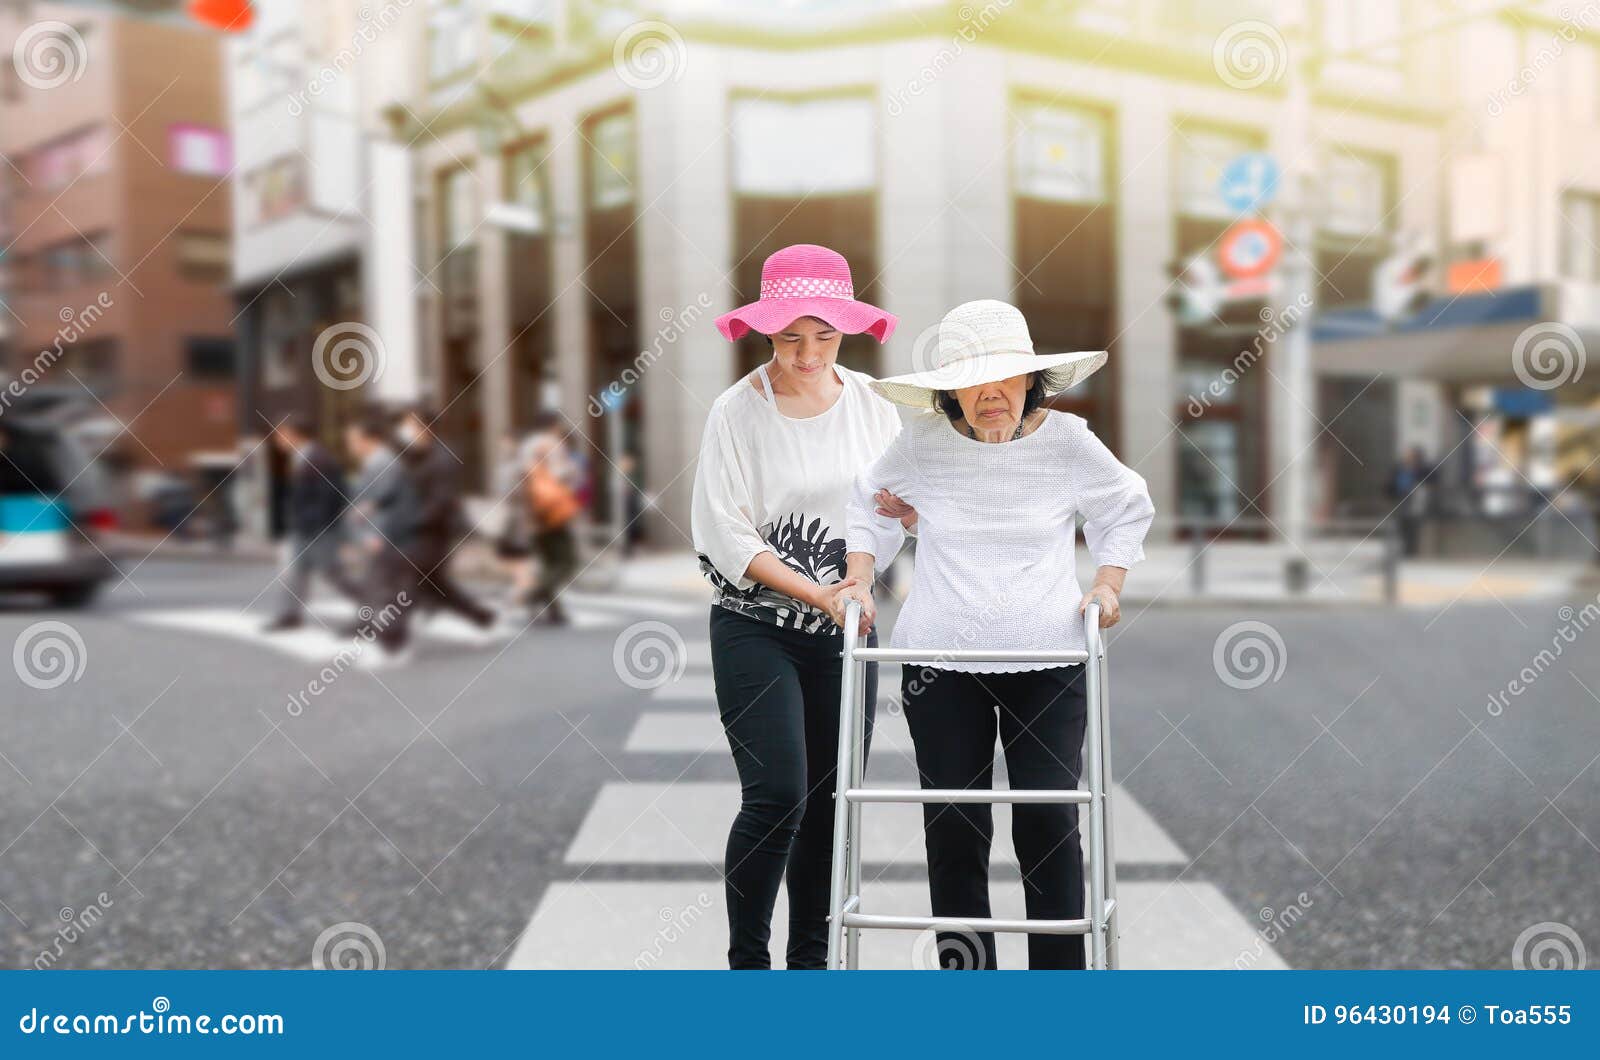 Daughter Take Care Elderly Woman Walking Across The Street Stock Photo Image Of Life City